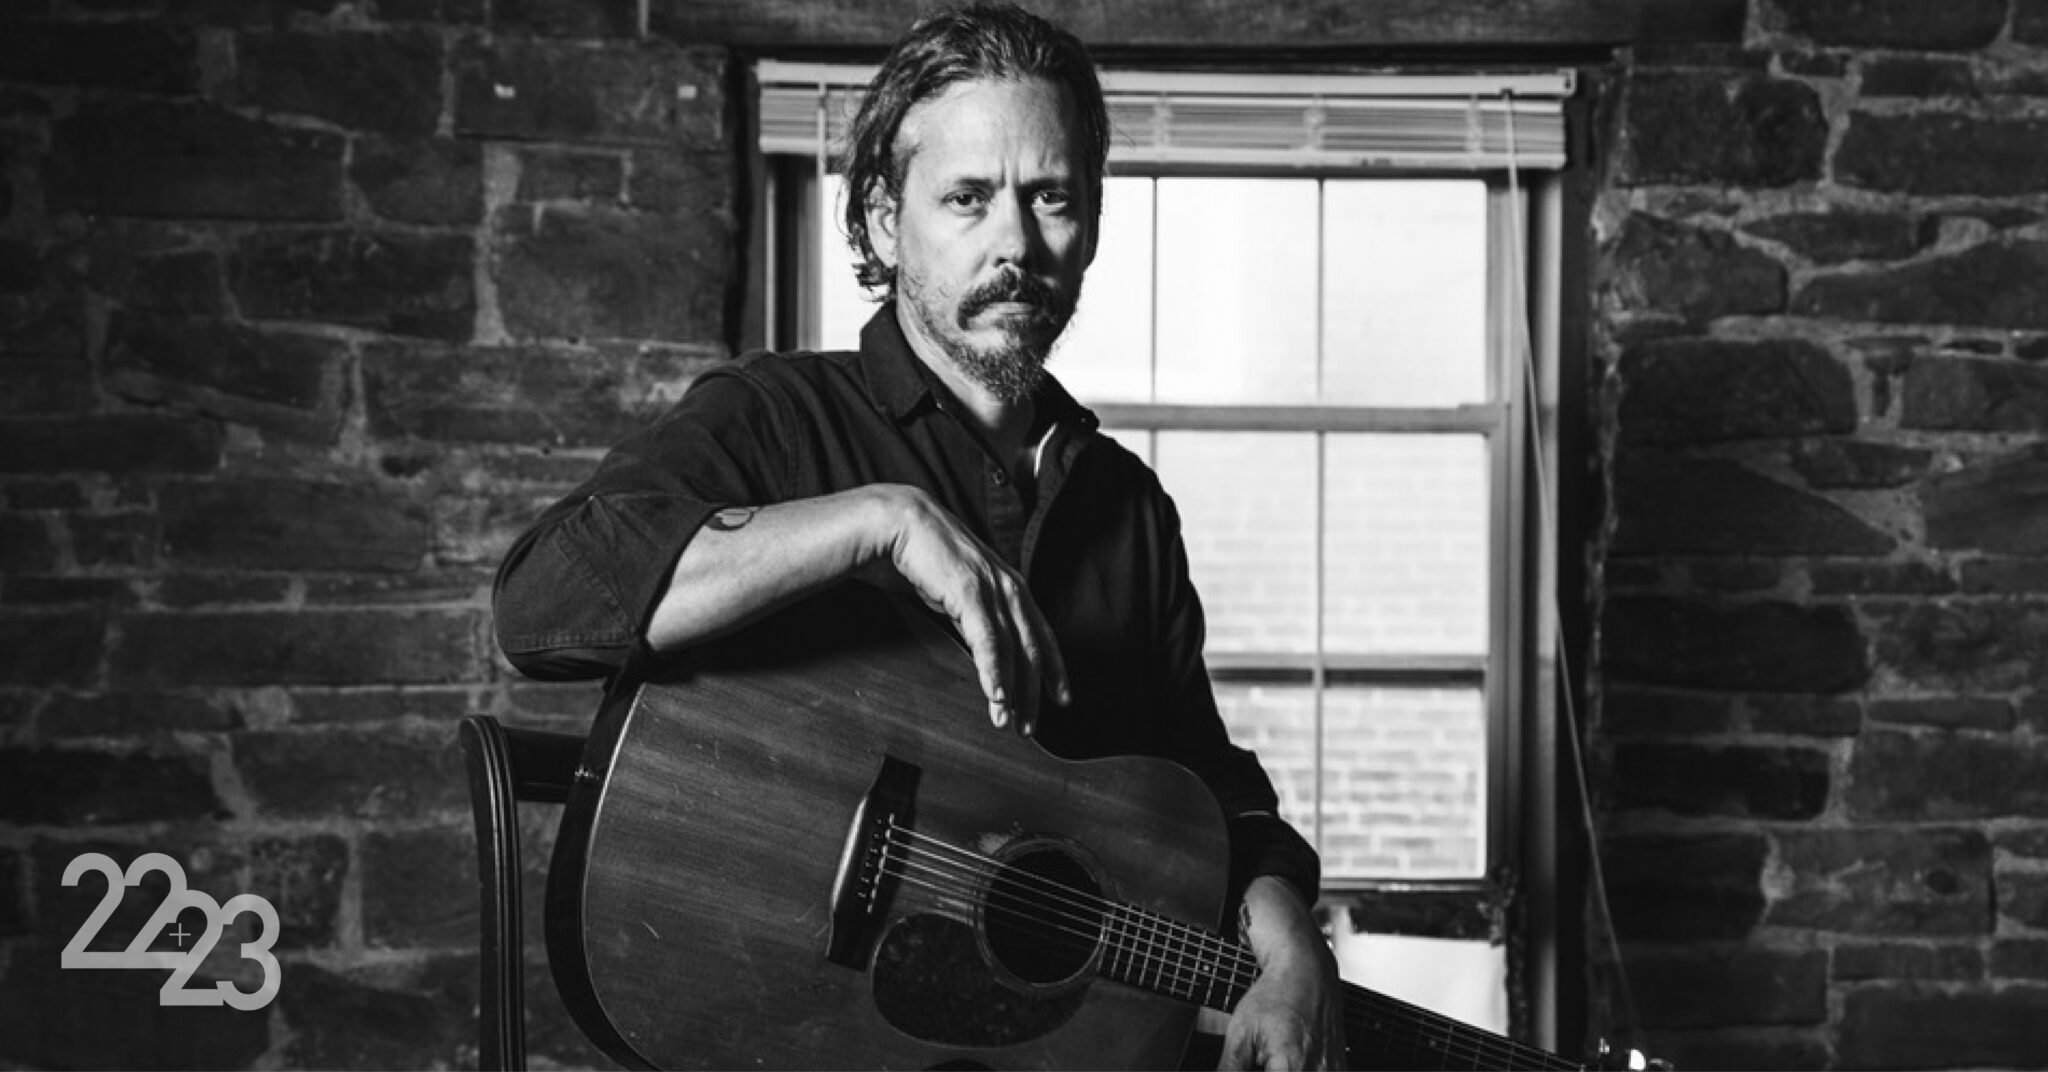 John Paul White Tess 8 weekend events in Birmingham including a Cherry Blossom Festival